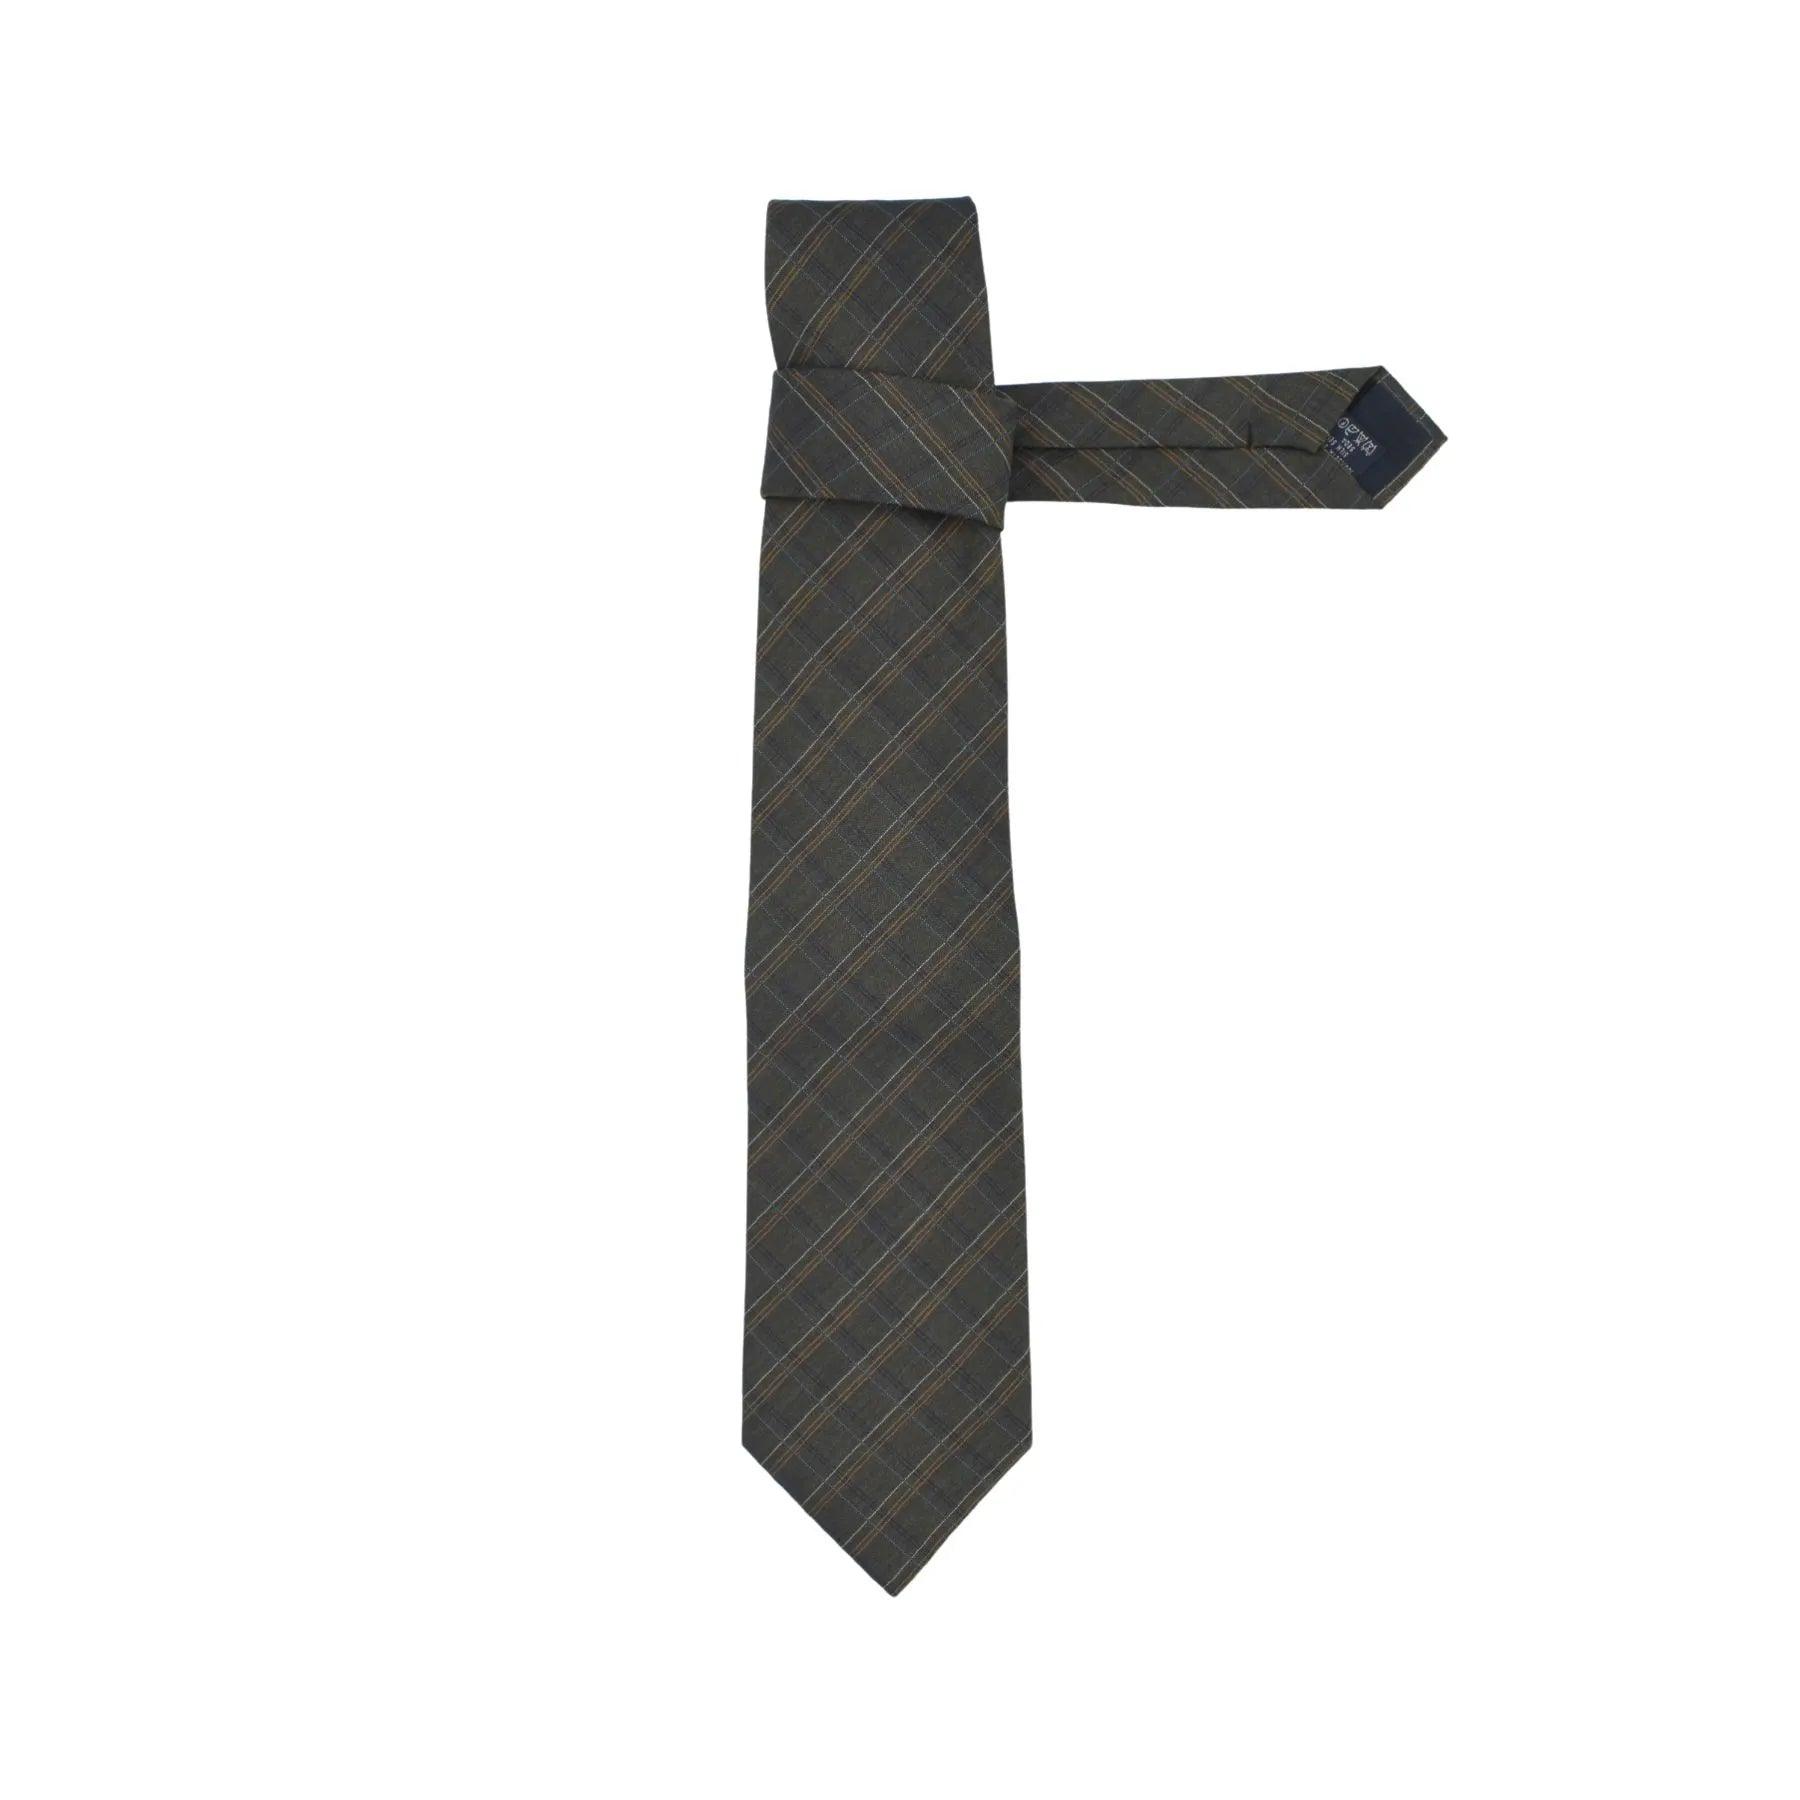 Burberry Tie - Fashionably Yours